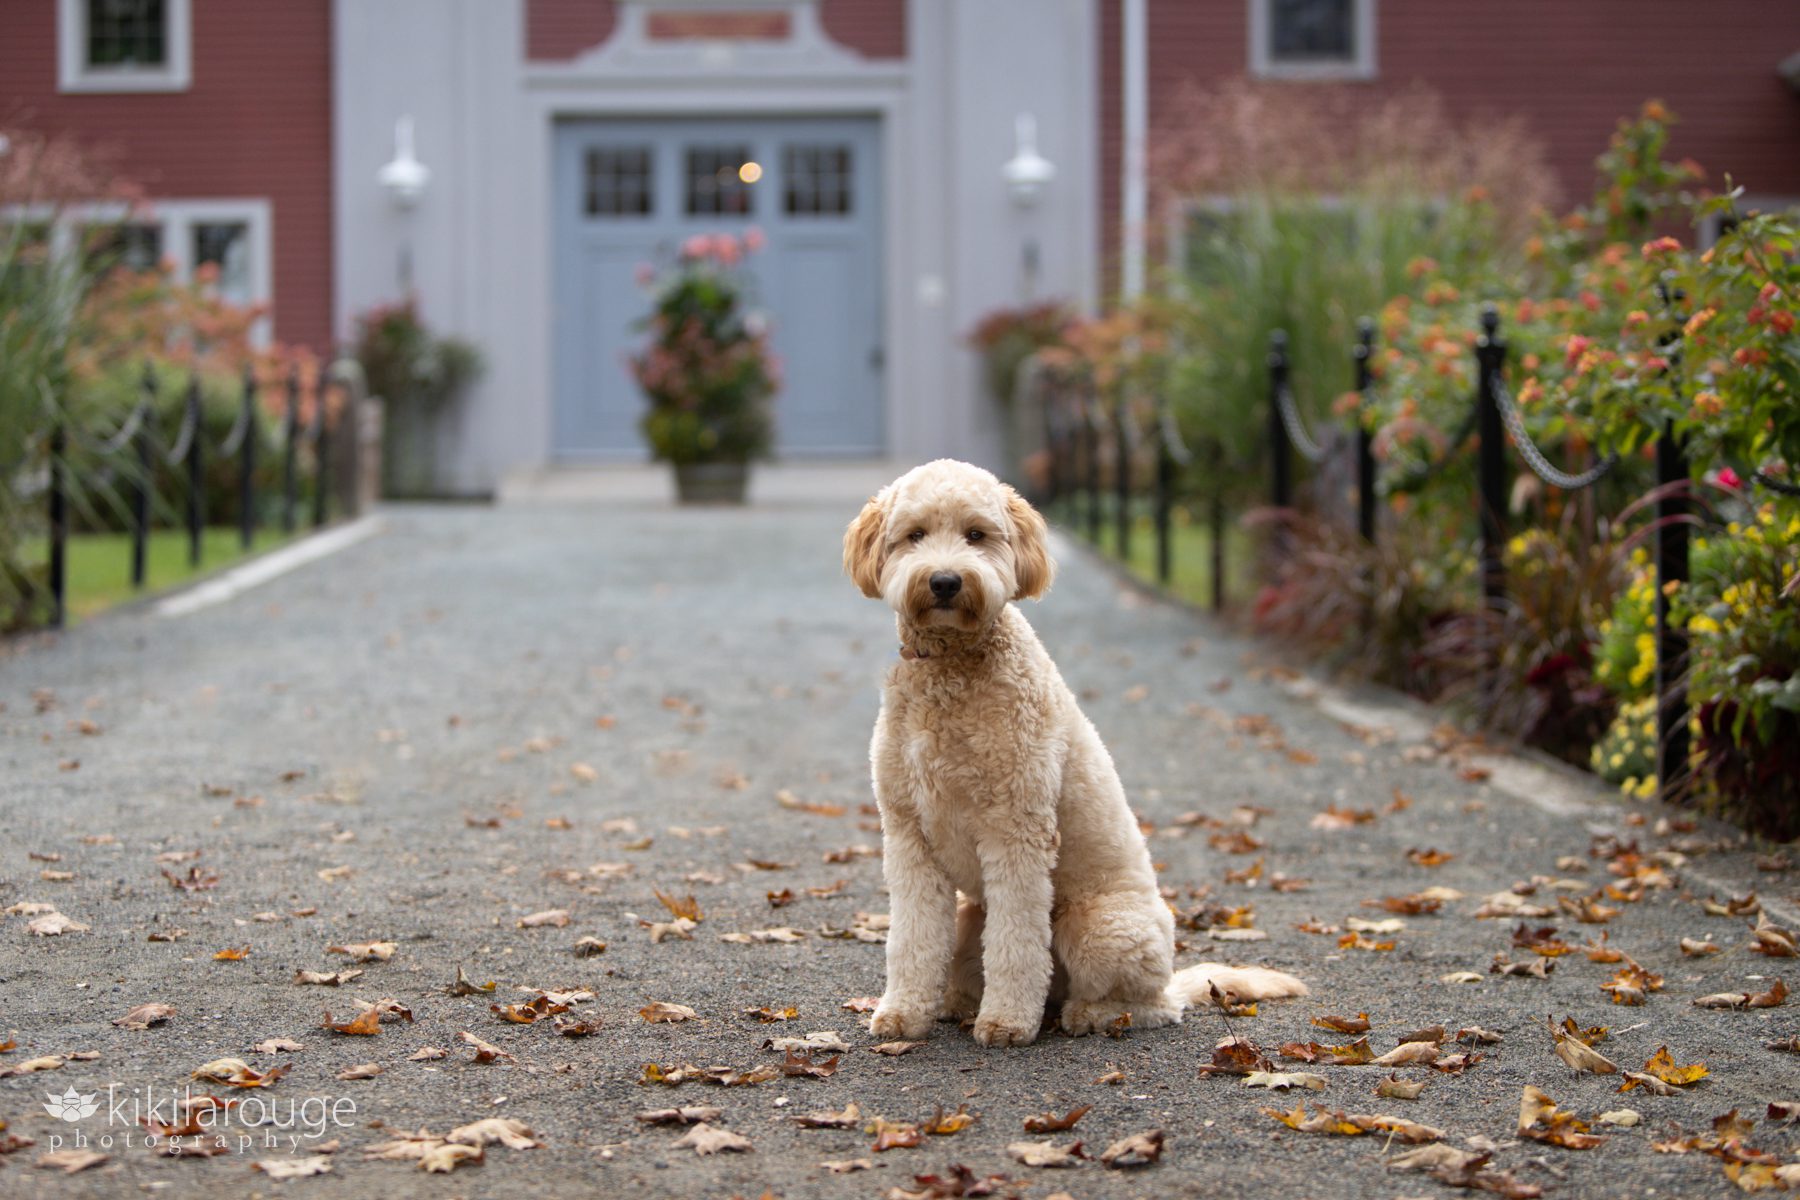 Cute labradoodle sitting on gravel walkway with leaves around and red building with gray doors in backdrop